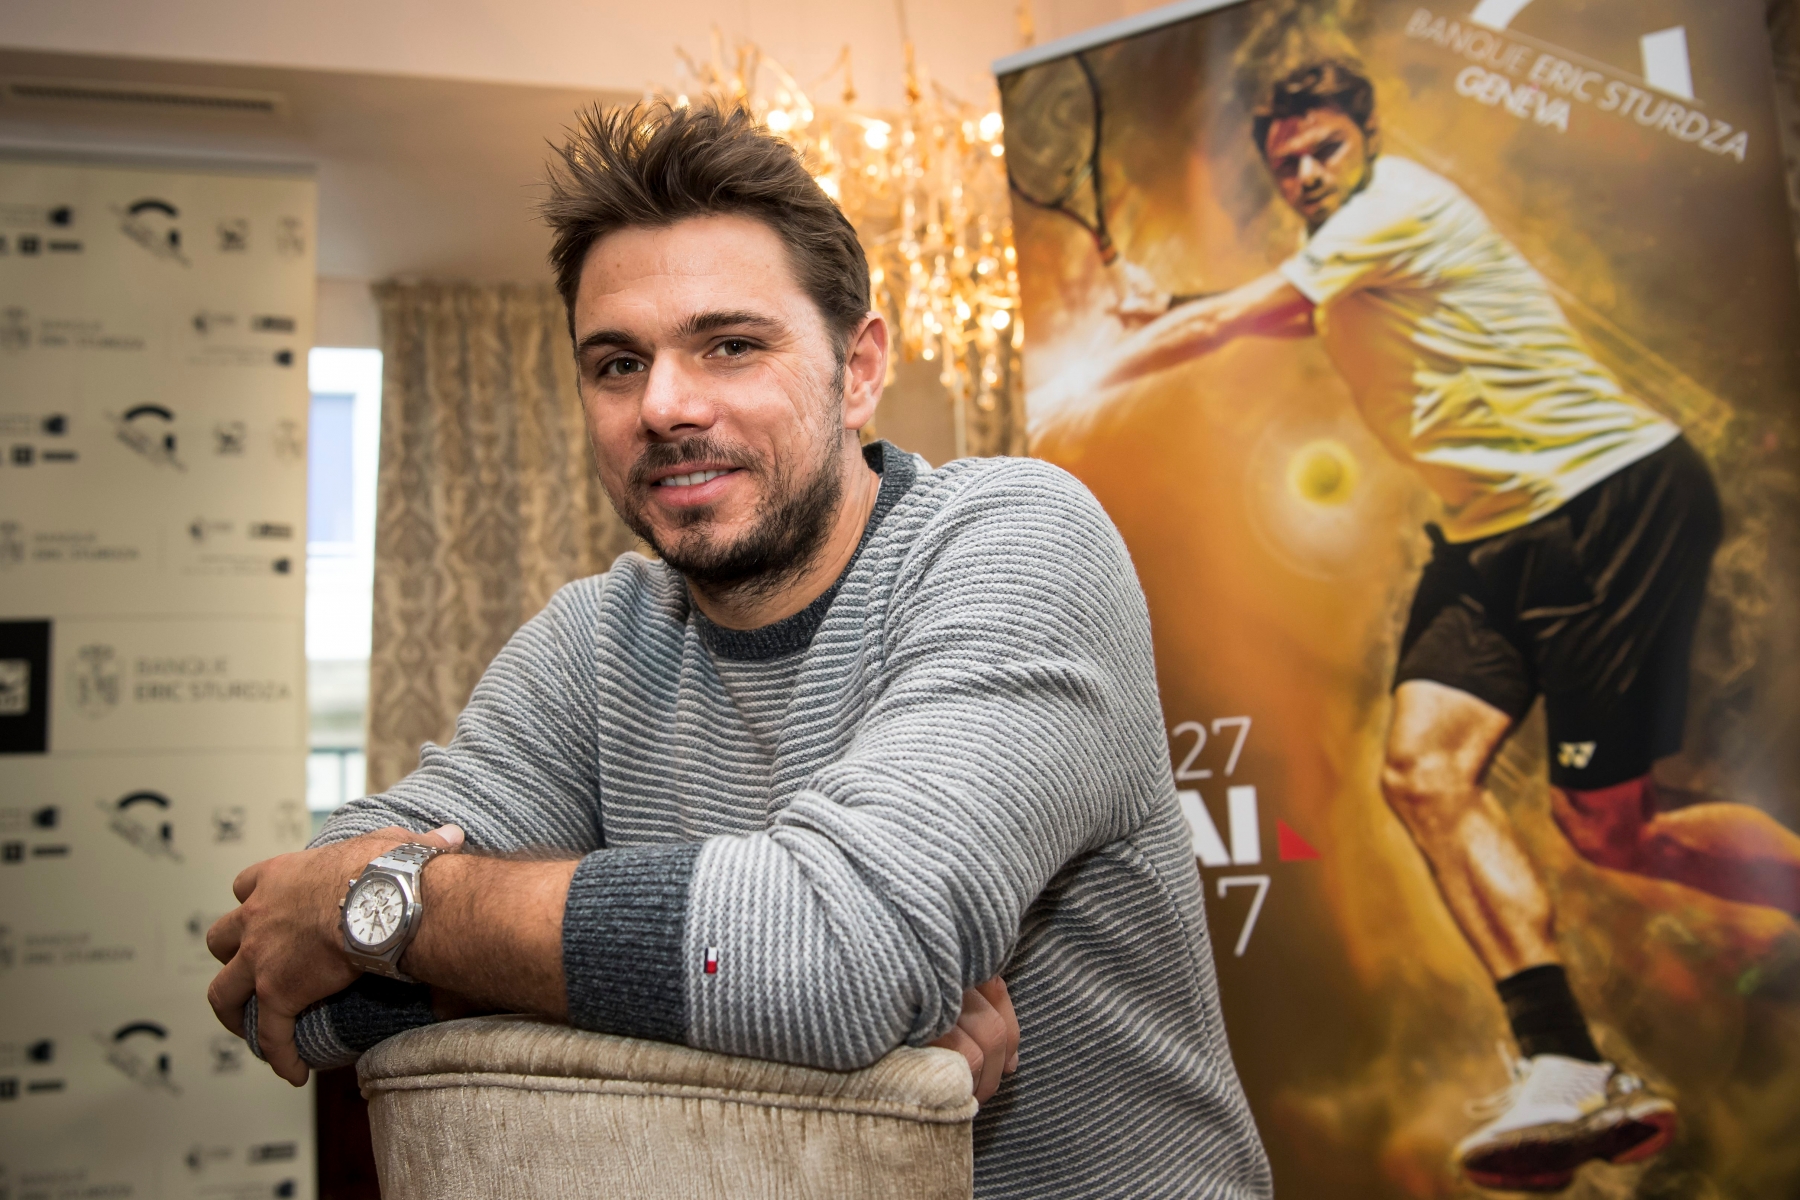 Swiss tennis player Stan Wawrinka poses in front of a poster during a press conference of the Geneva Open 2017 tennis tournament, on Wednesday, November 30, 2016, in Geneva, Switzerland.(KEYSTONE/Jean-Christophe Bott) SCHWEIZ TENNIS GENEVA OPEN 2017 STAN WAWRINKA